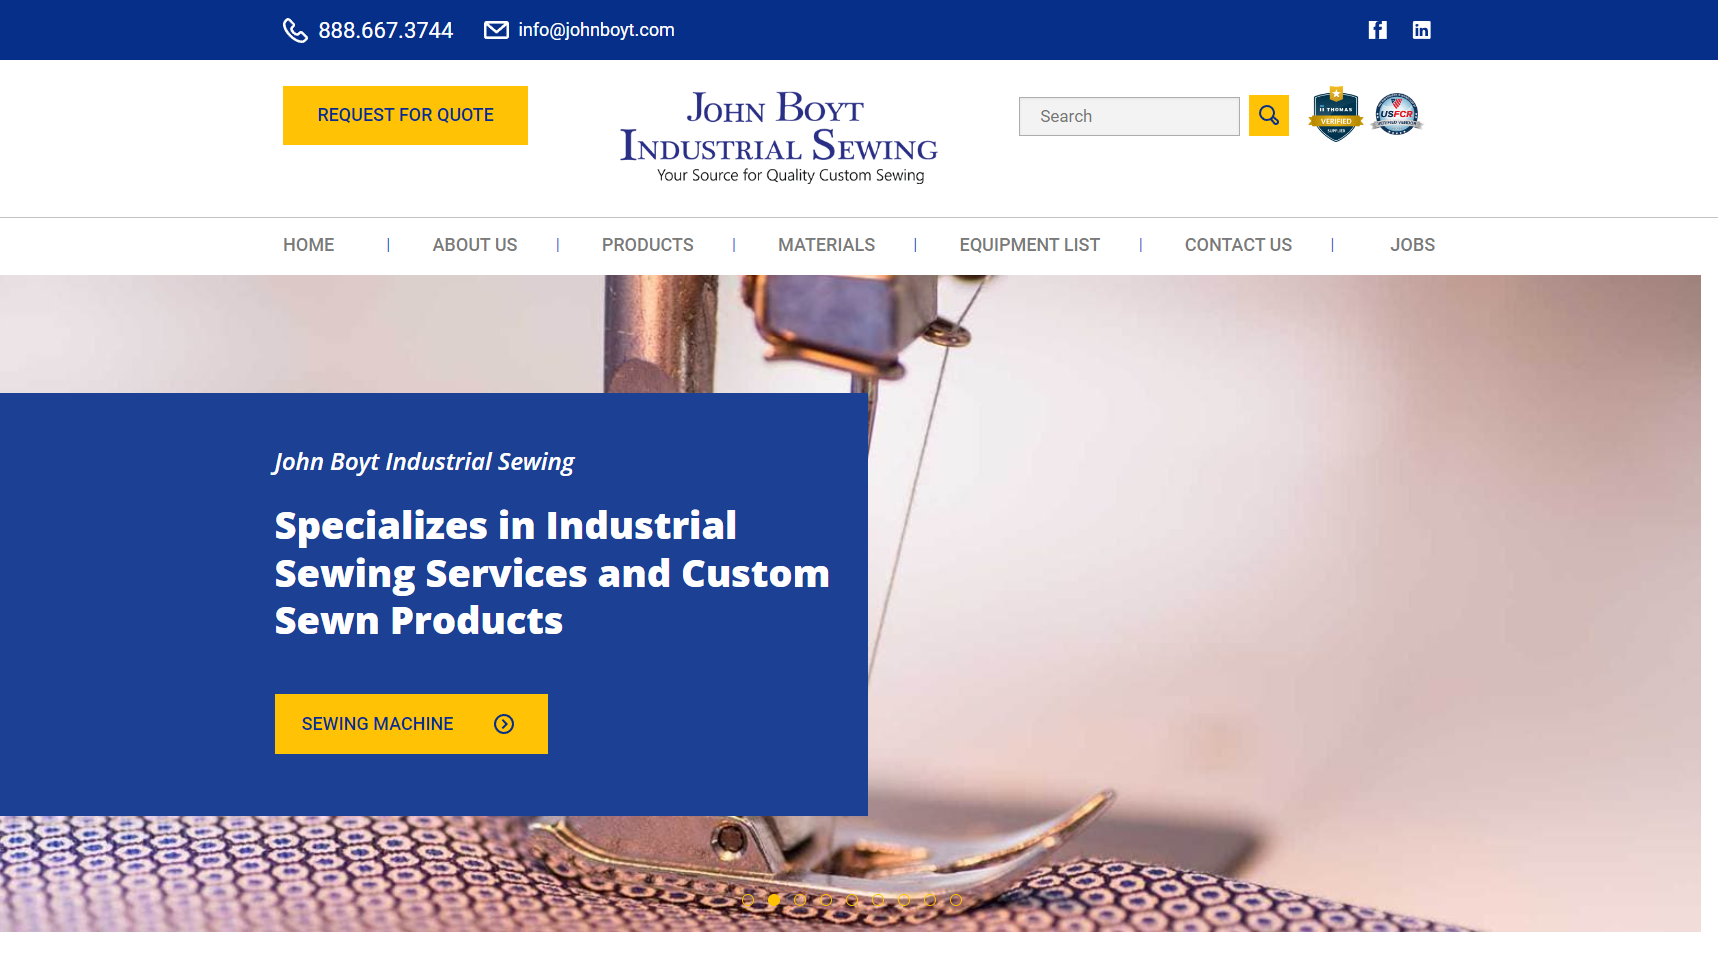 John Boyt Industrial Sewing - Cut And Sew Manufacturer